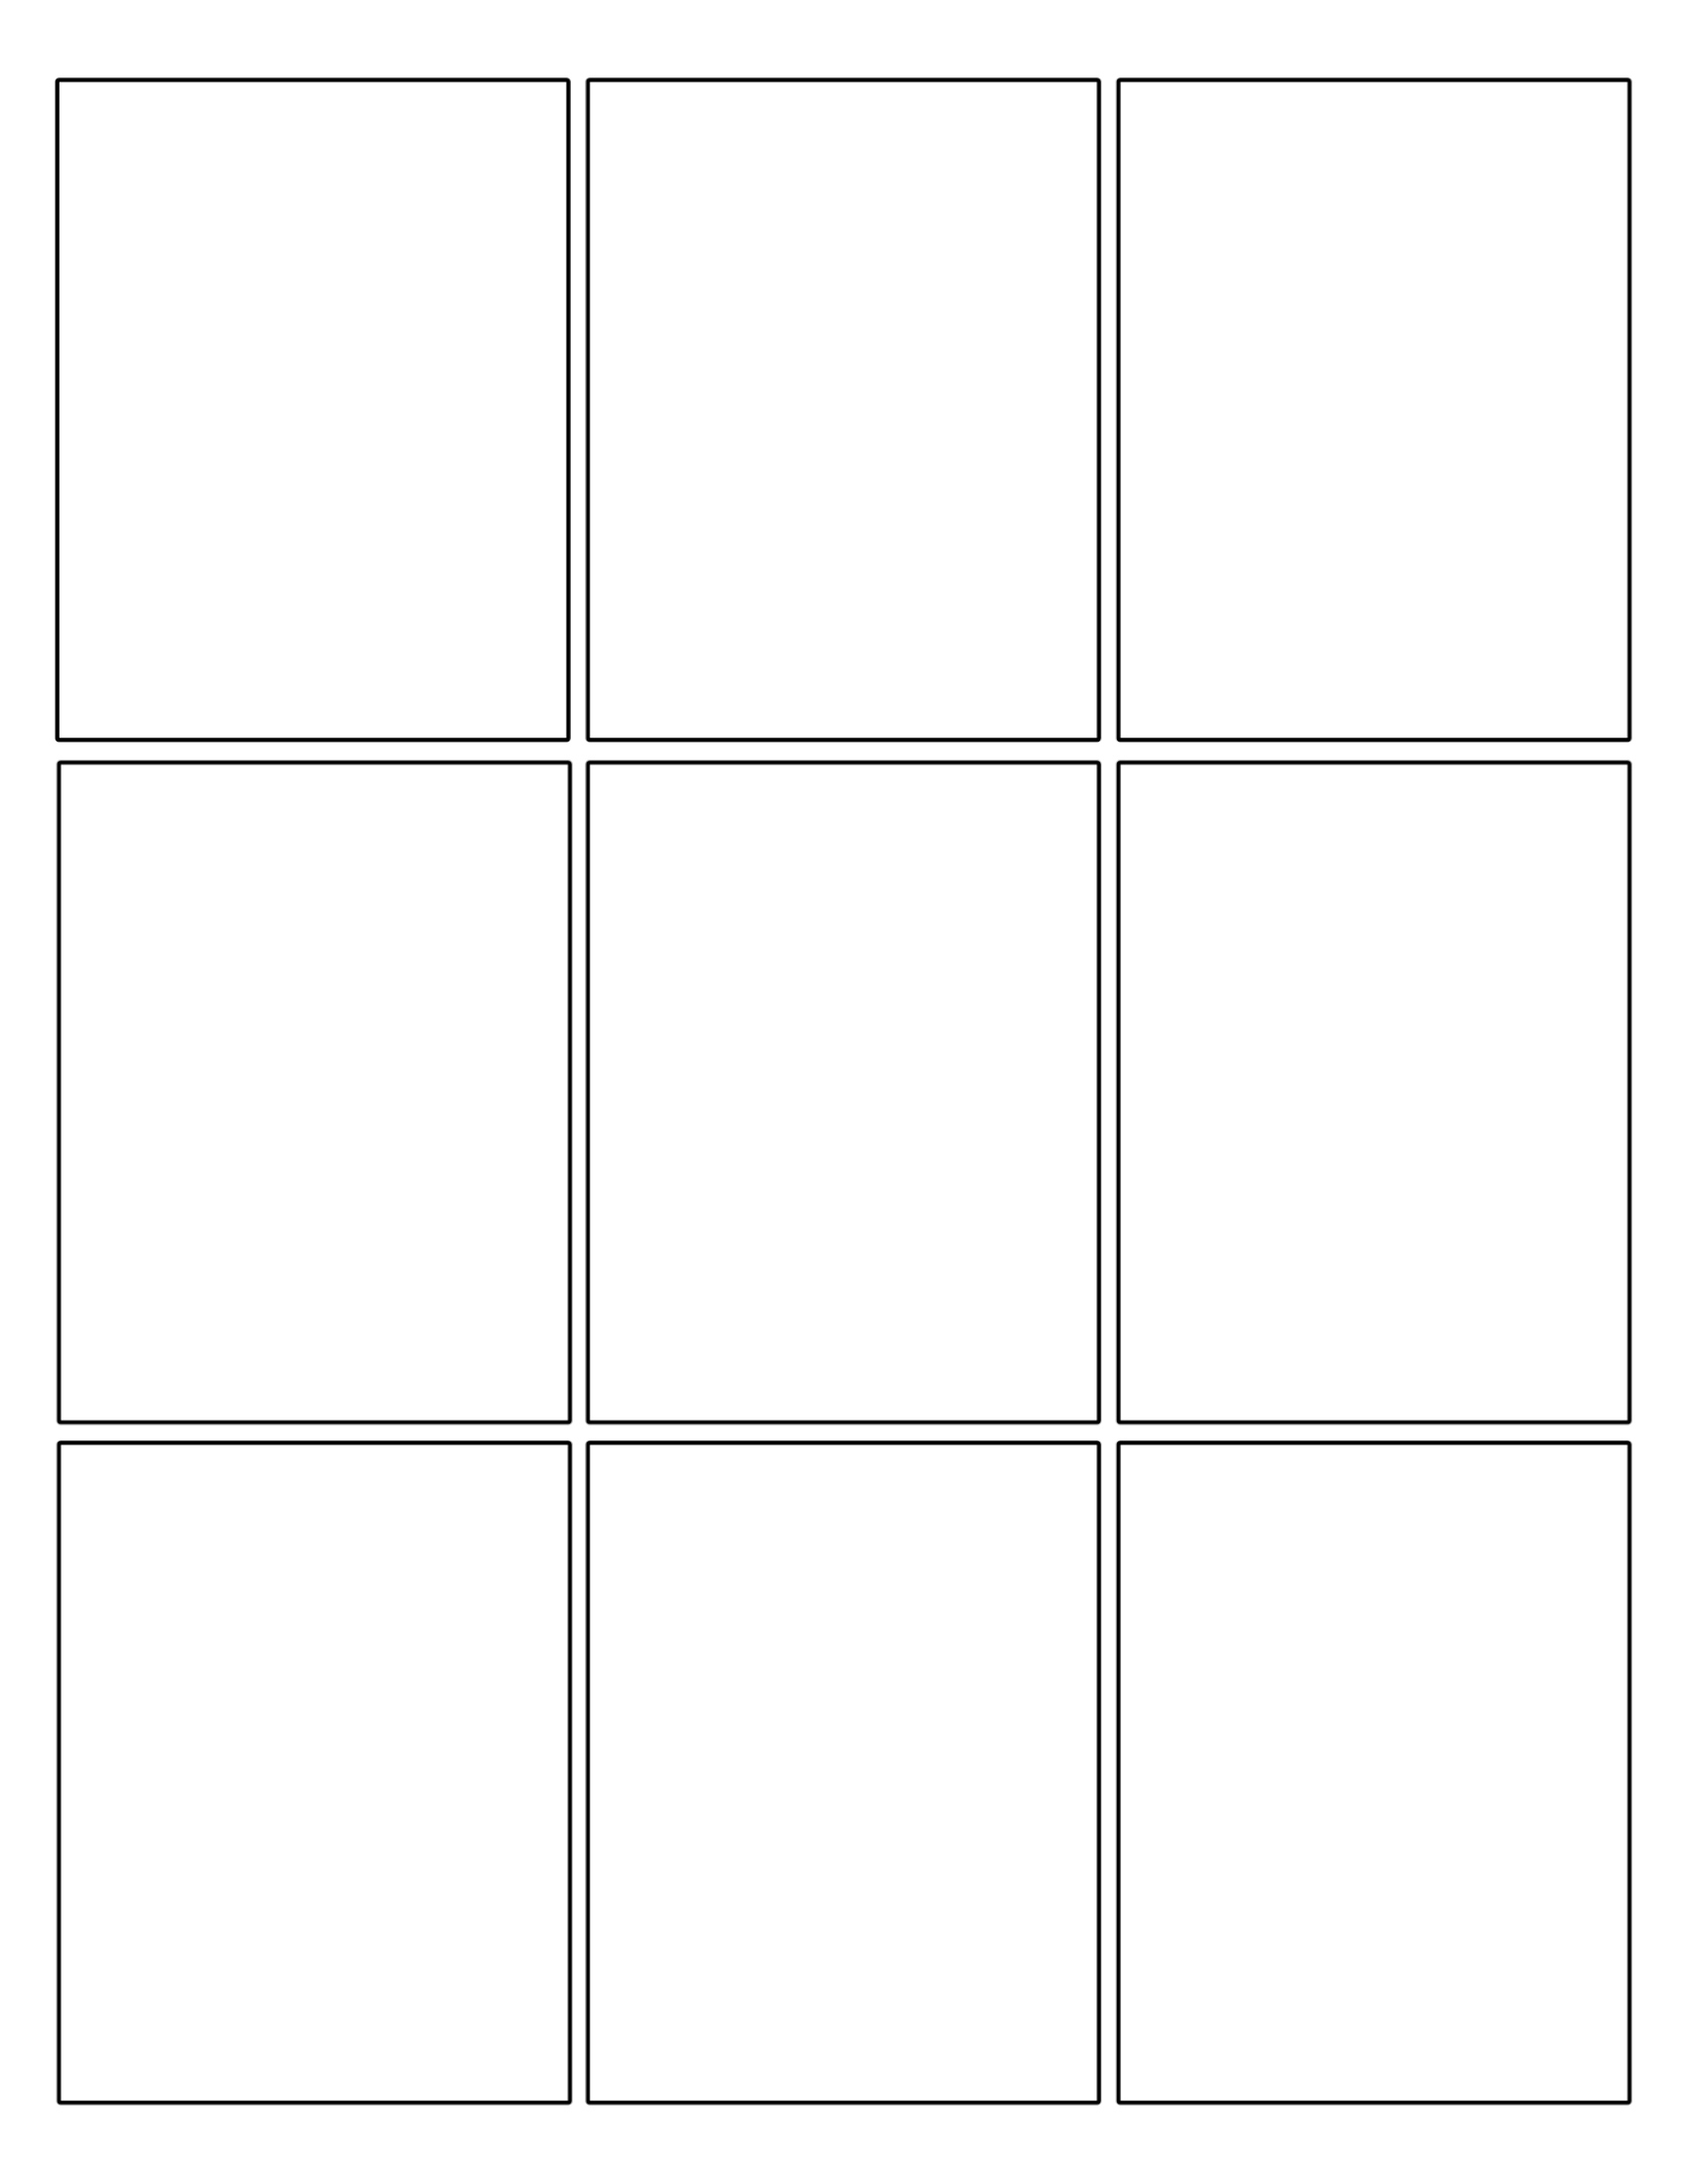 Free Printable Comic Strip Template Pages | Paper Trail Design with Printable Blank Comic Strip Template For Kids